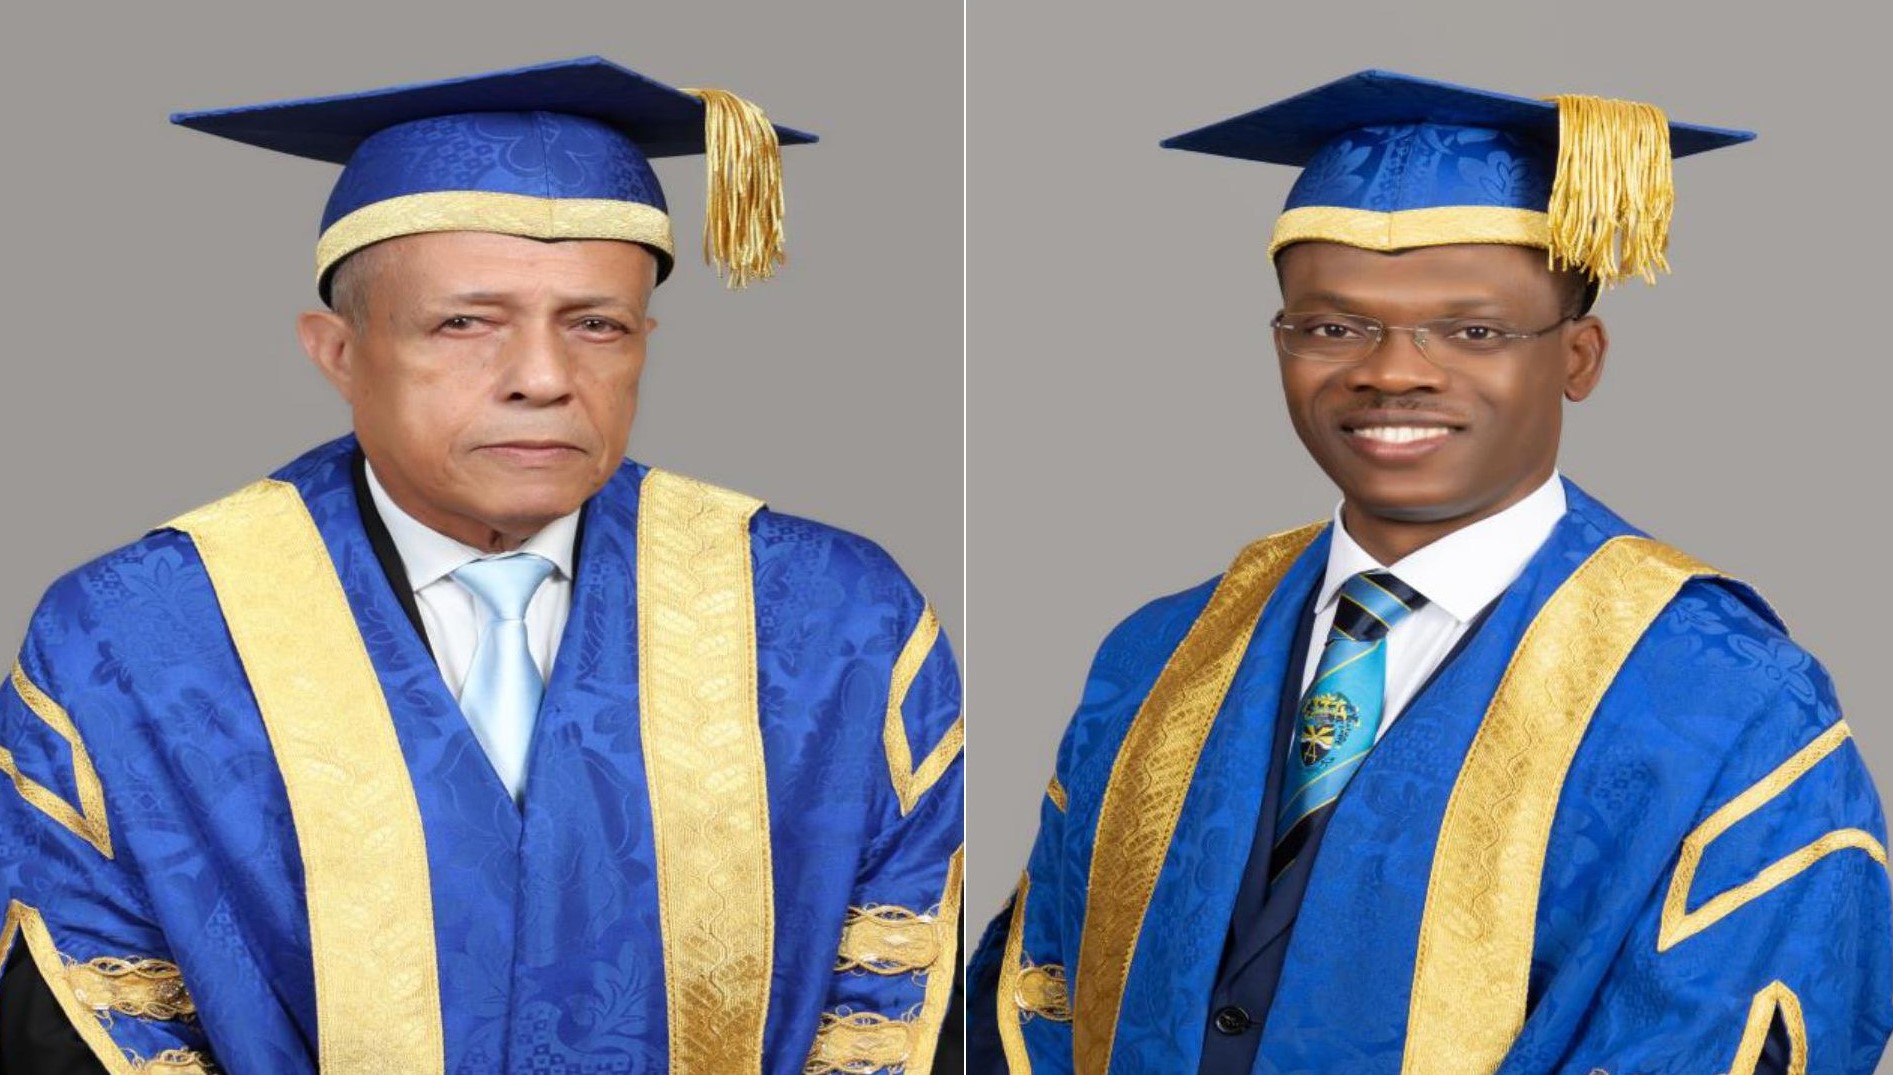 UTech, Ja to Install Fifth Pro-Chancellor and Fifth President